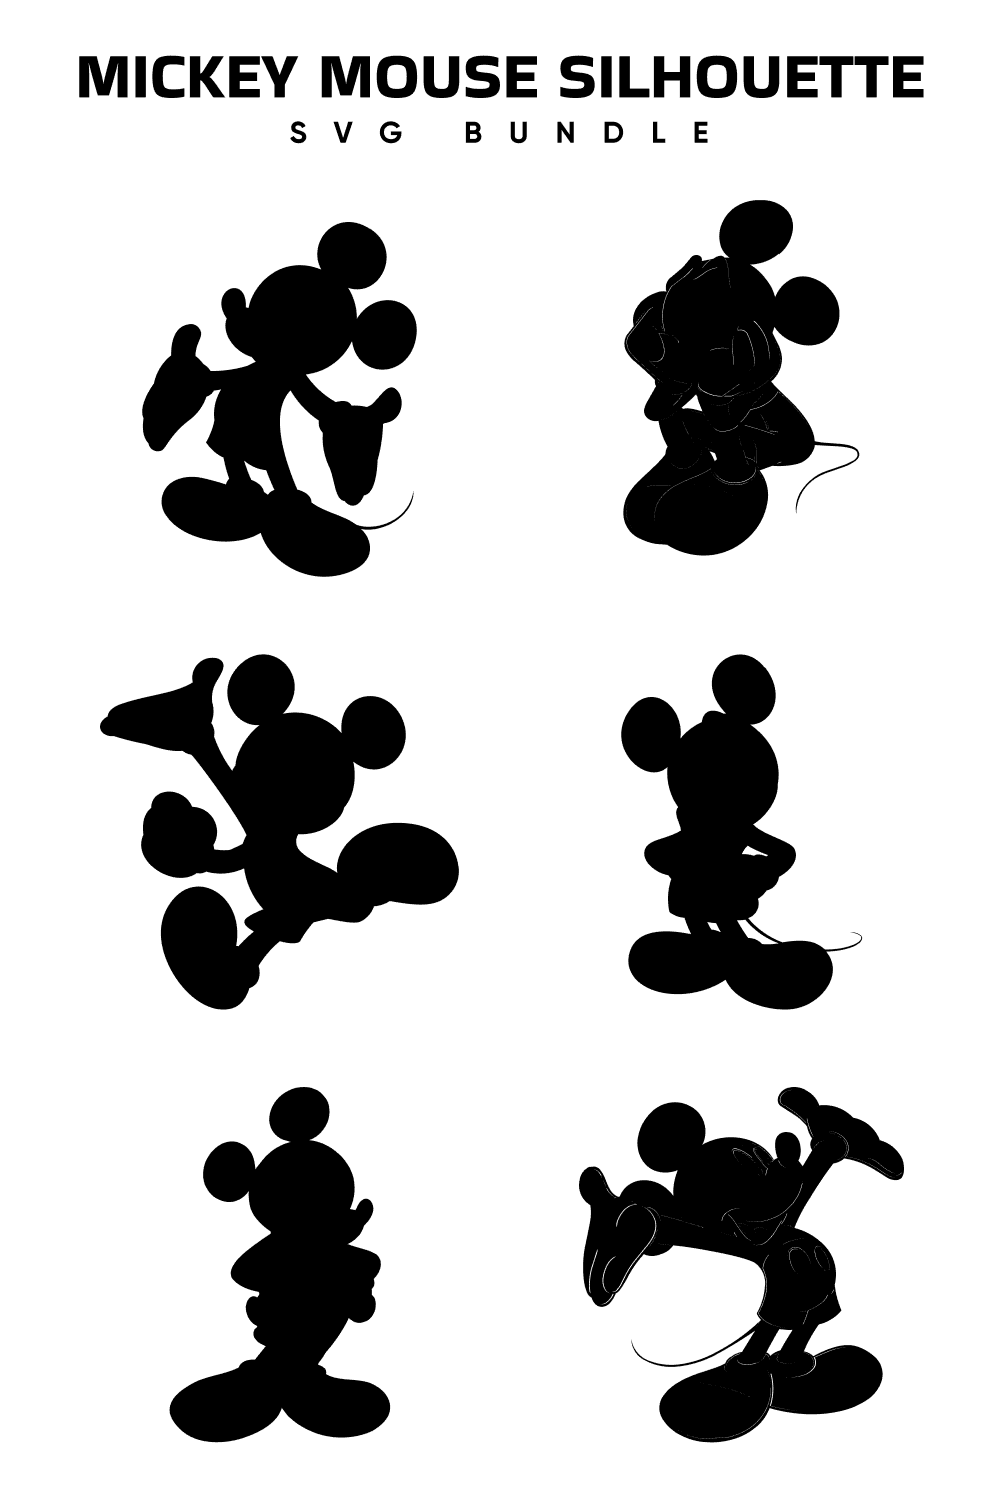 Bundle with enchanting images of Mickey Mouse silhouettes.